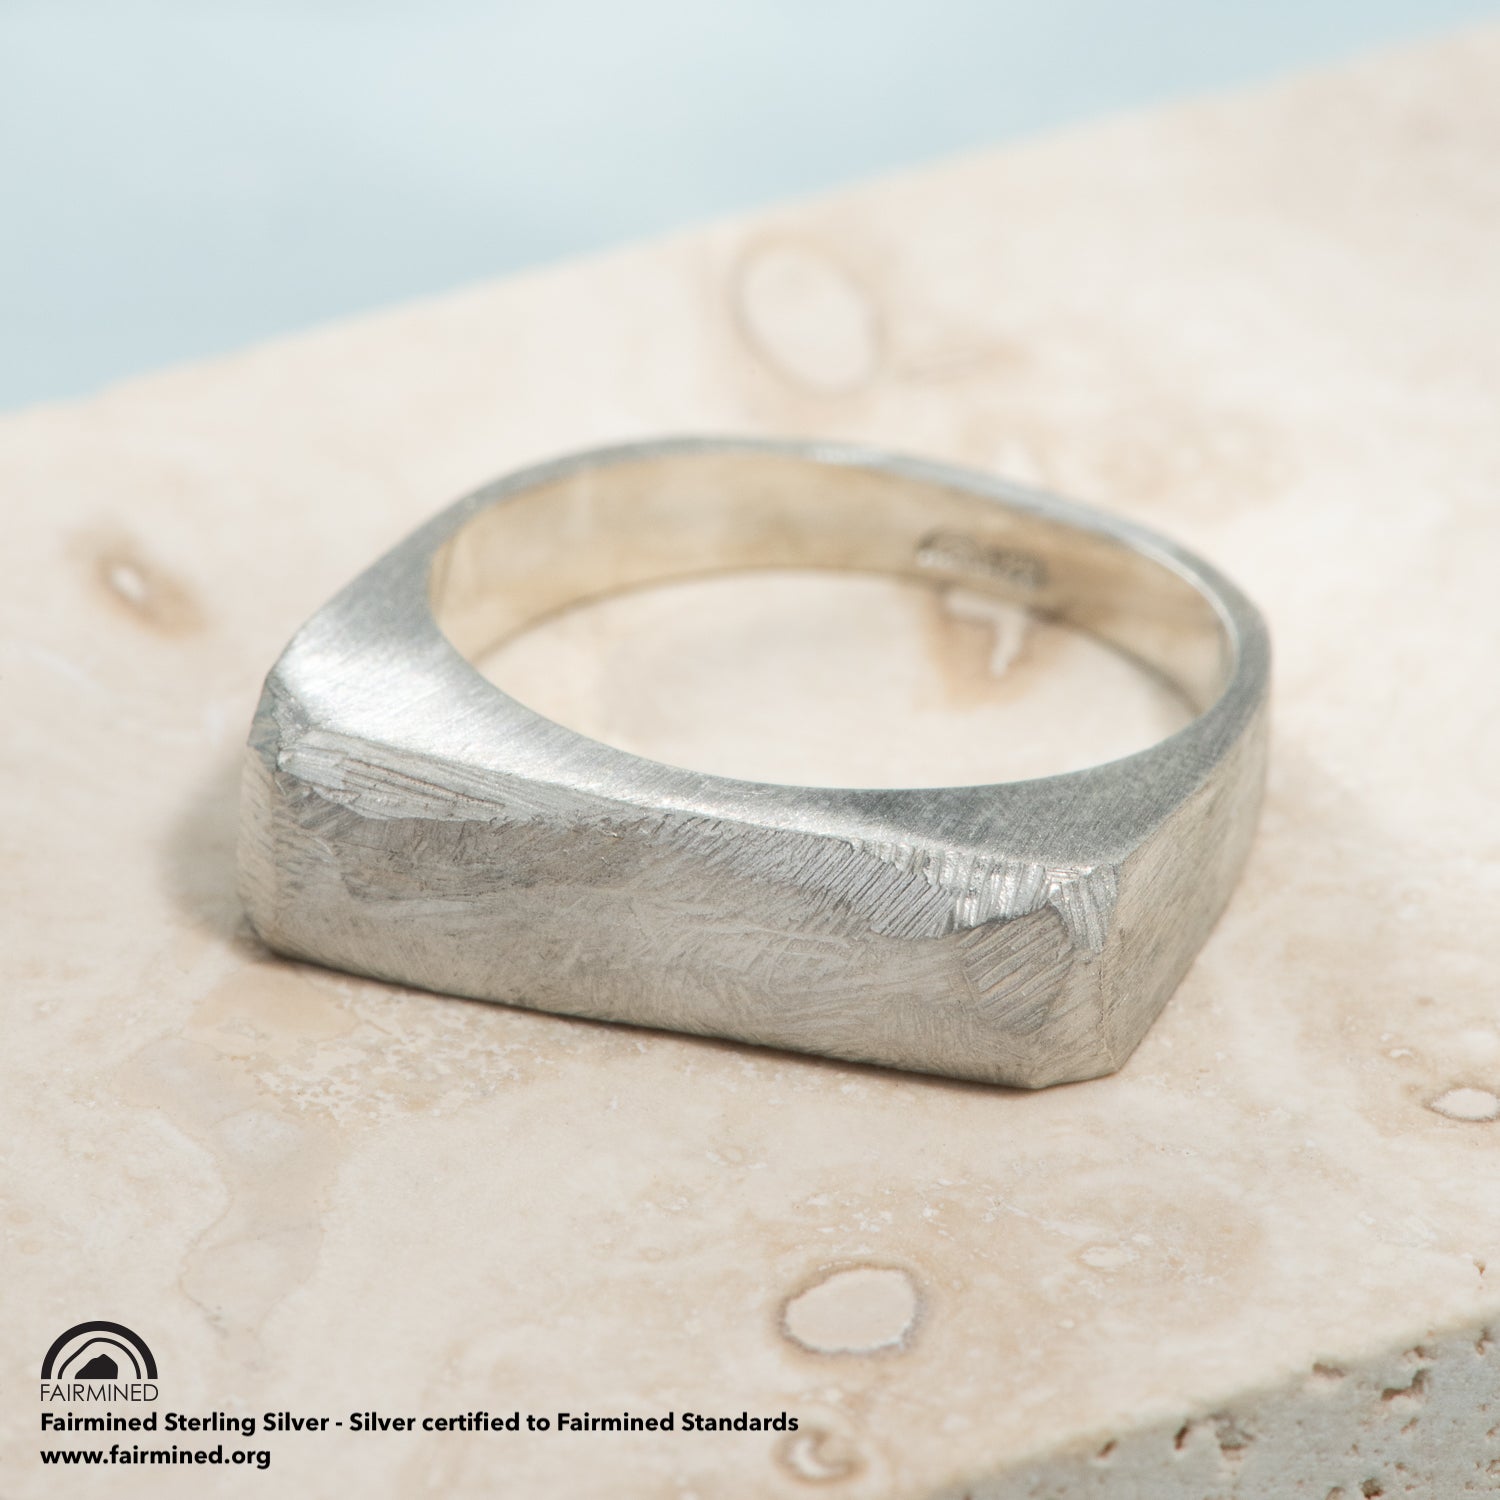 A carved, squared top silver signet ring with a brushed finish.